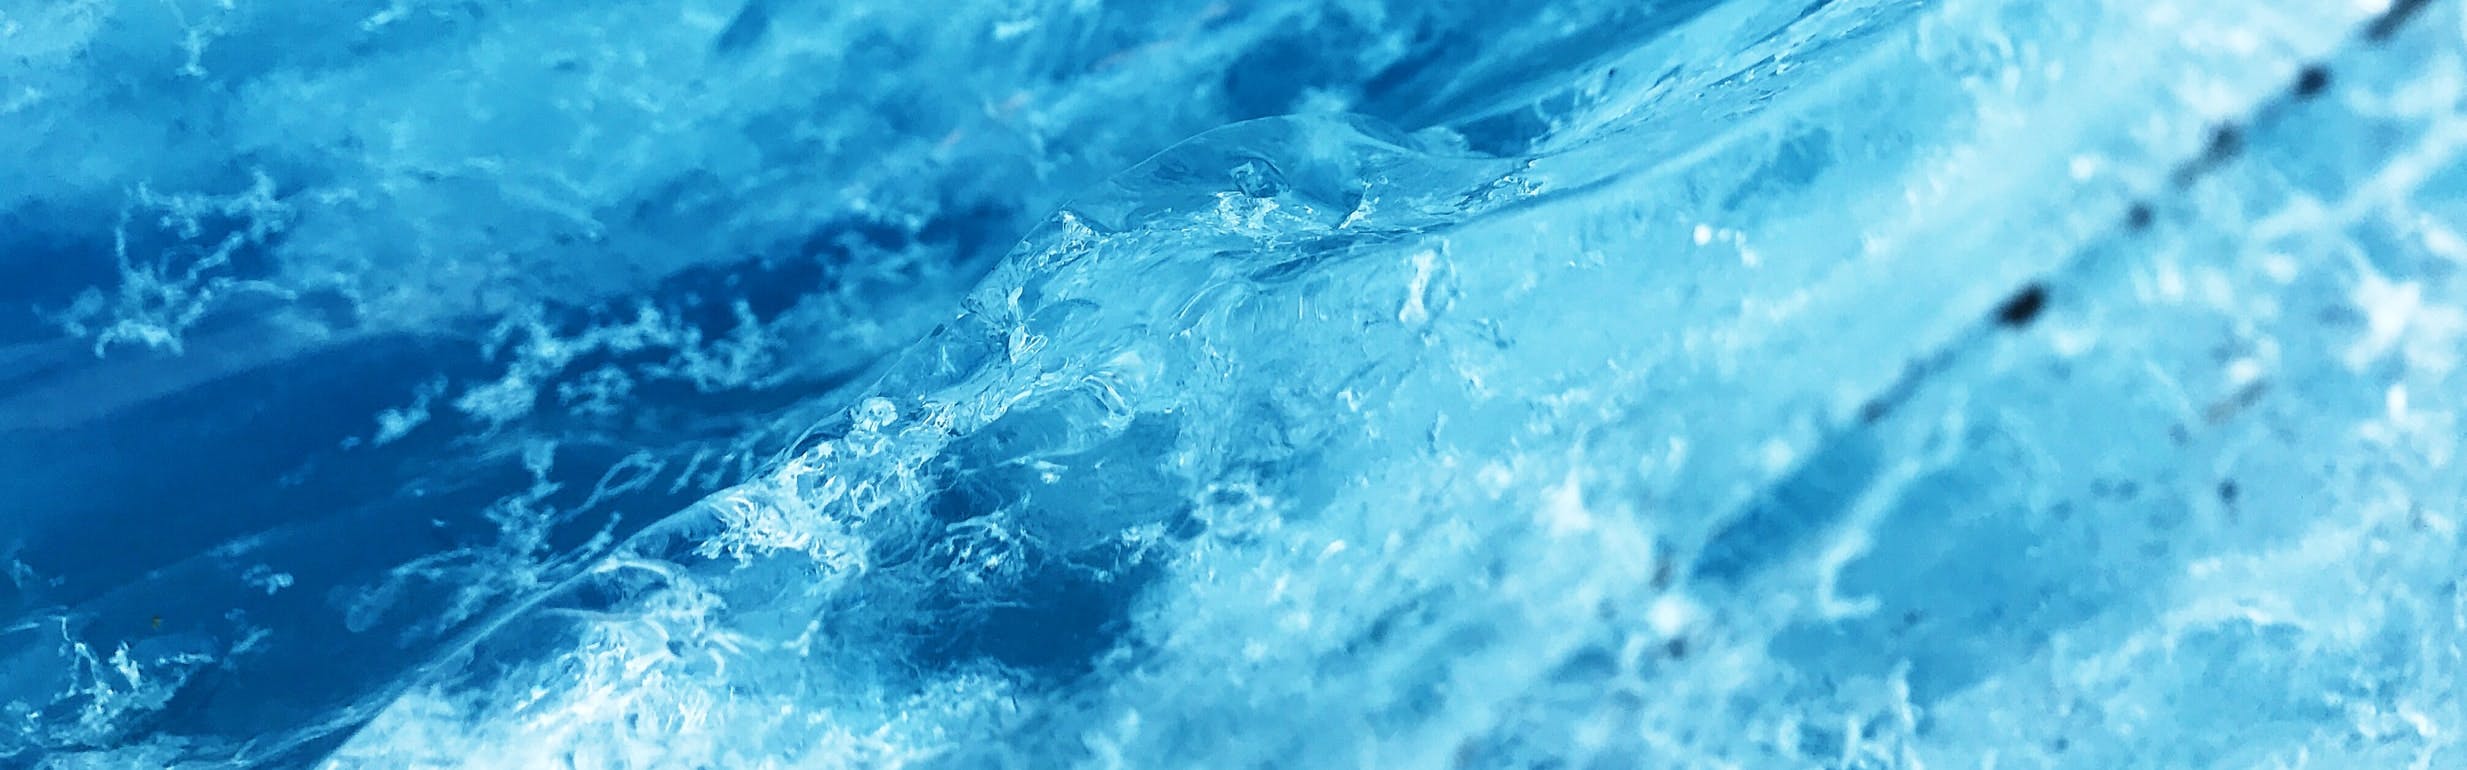 A close-up image of fractures within a block of blue-tinted ice.